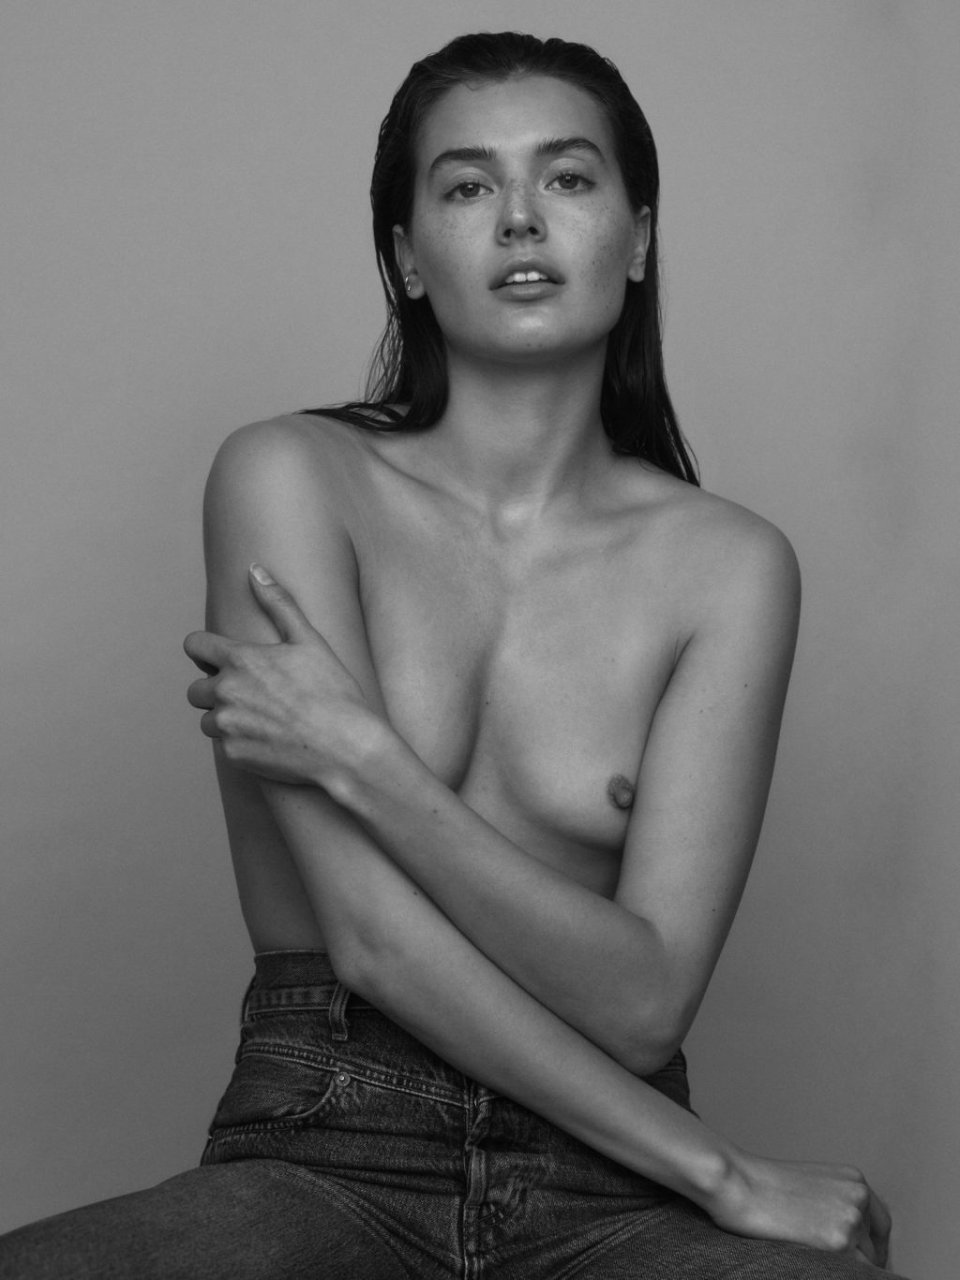 Jessica clements naked